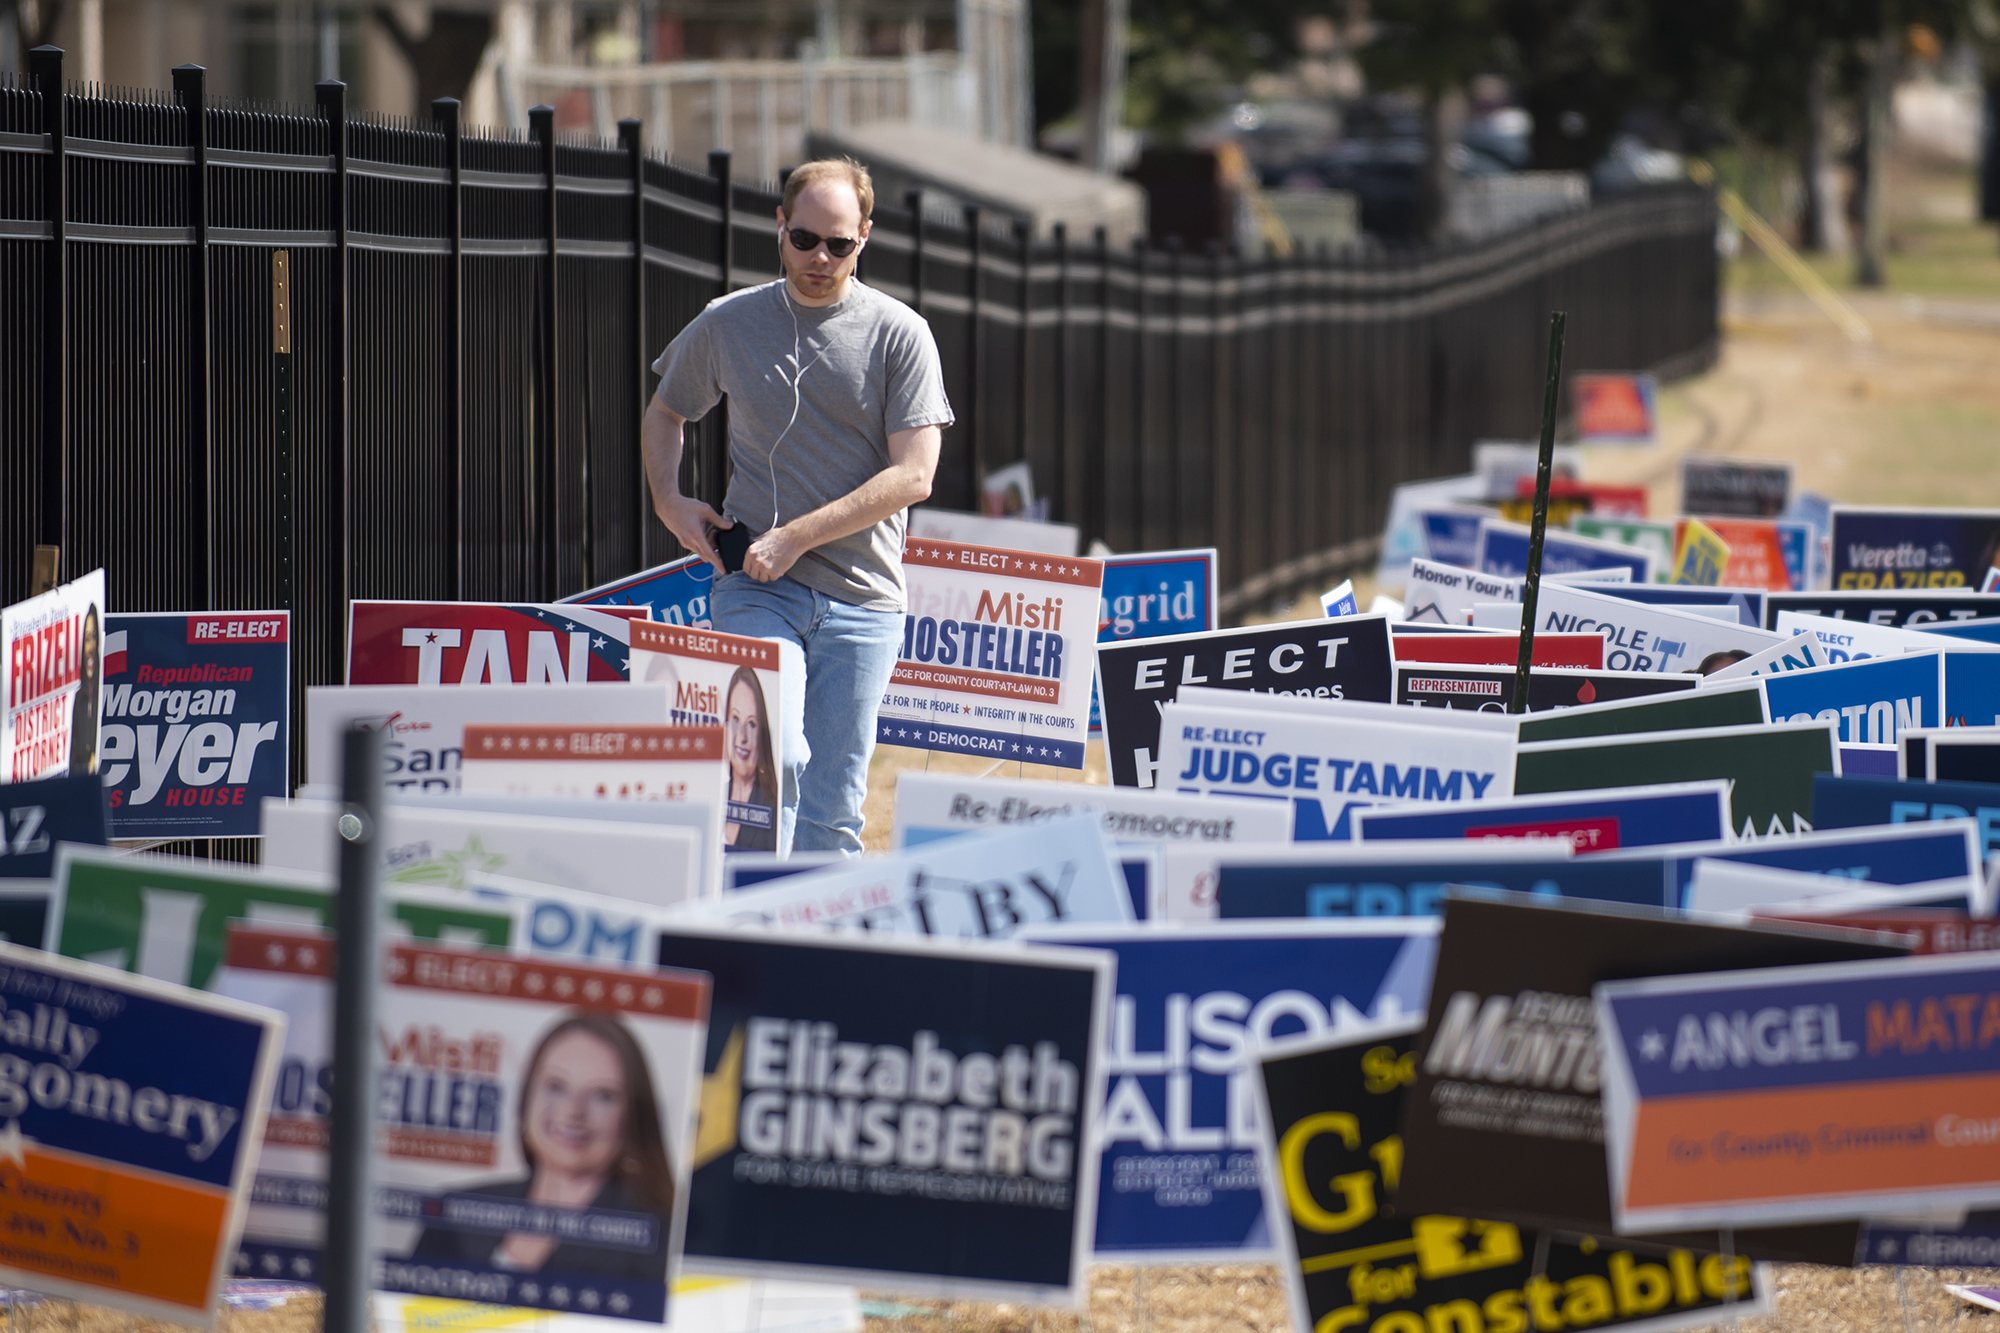 Man in sunglasses with earbuds walks throught a field covered in campaign posters